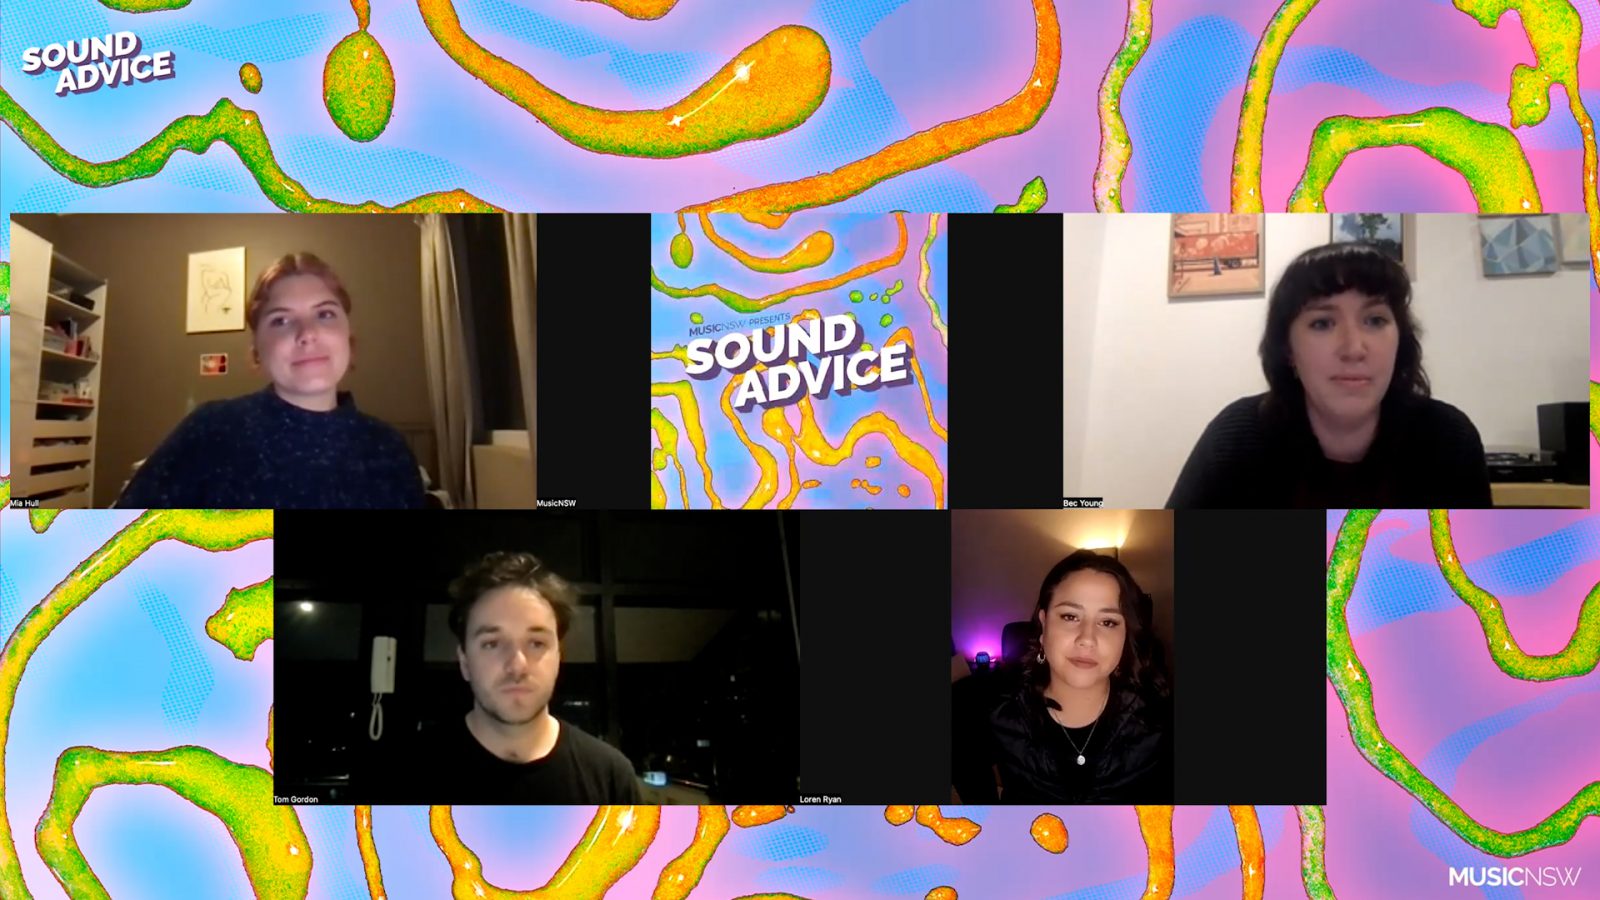 Panellists' zoom video feeds tiled over swirling colourful background